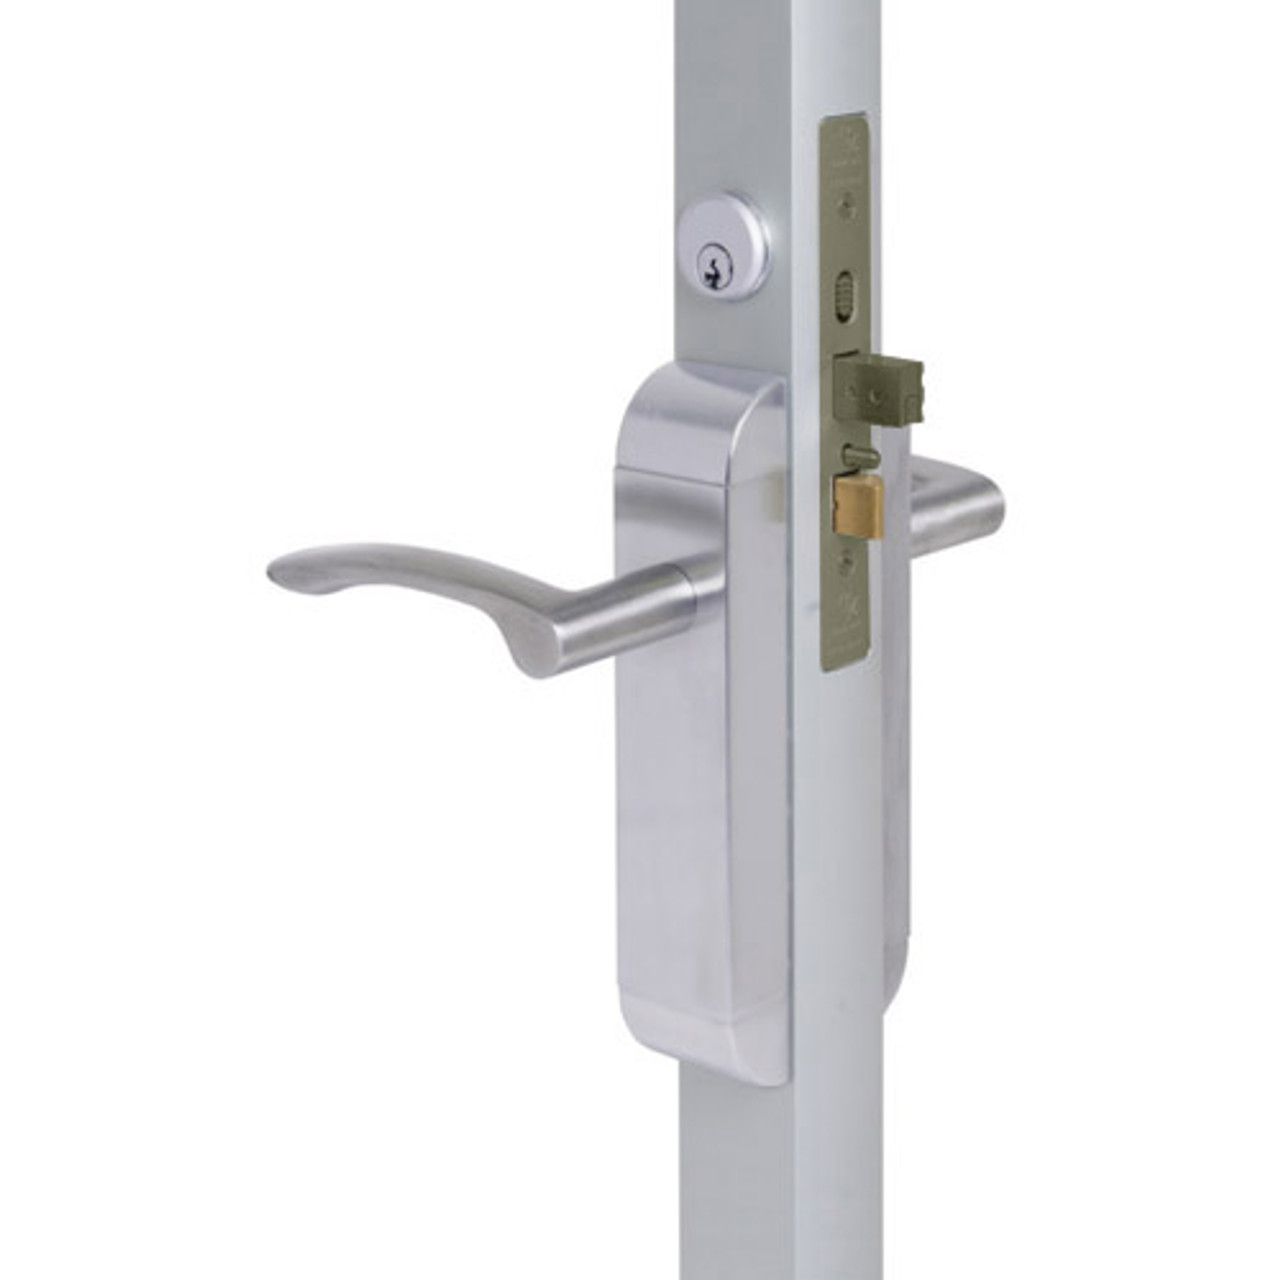 2190-422-202-32 Adams Rite Dual Force Interconnected 2190 series Deadlock/Deadlatch in Bright Stainless